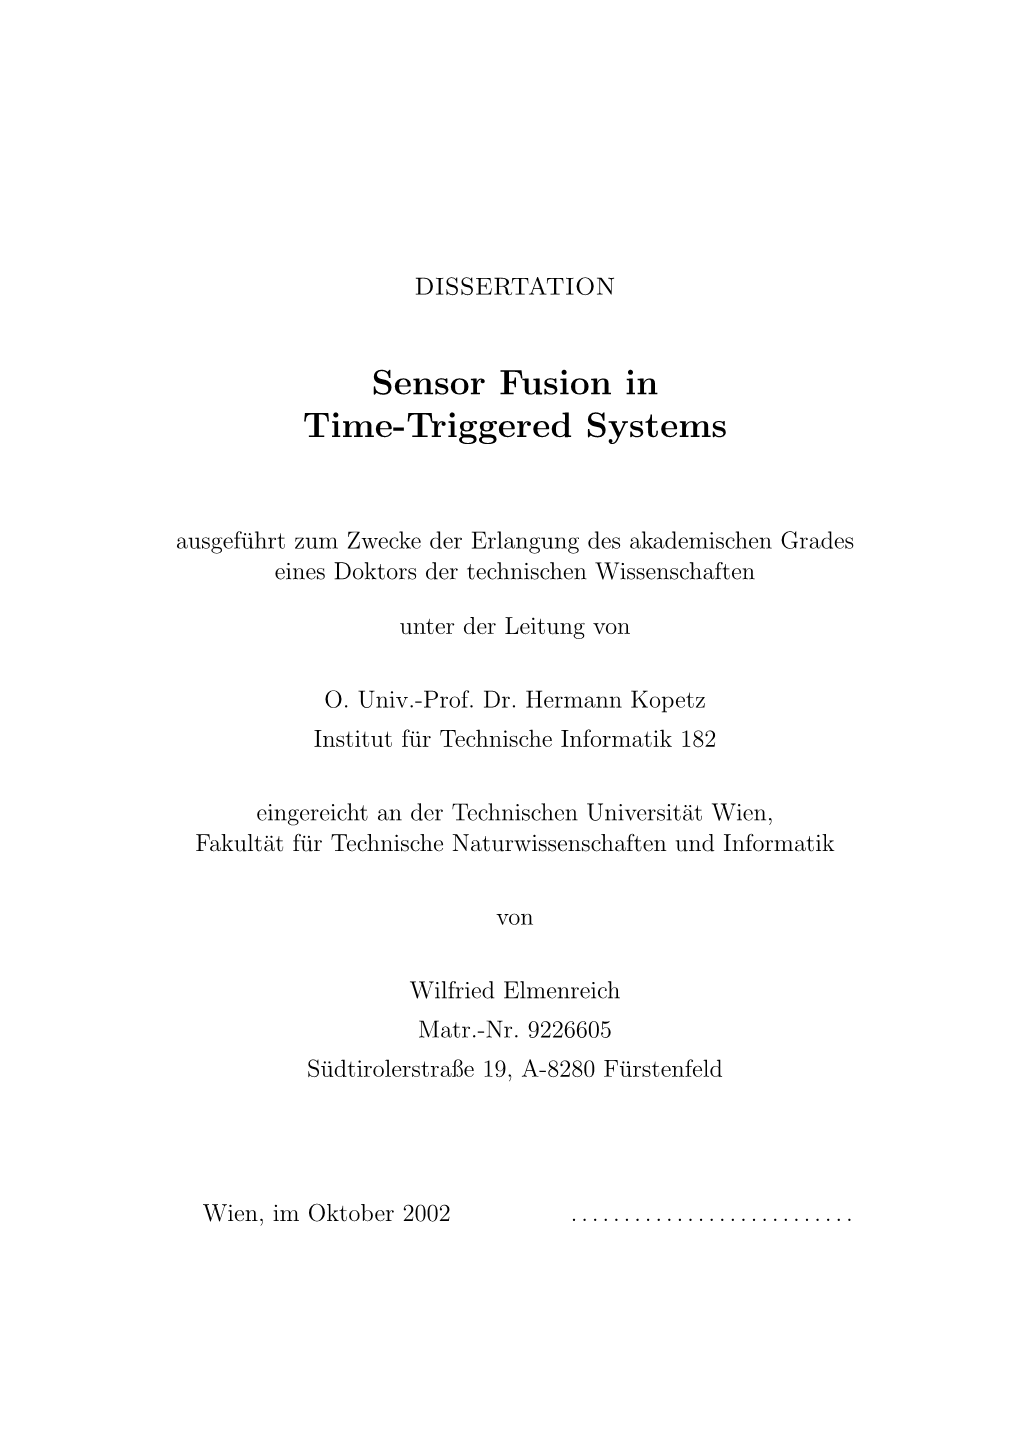 Sensor Fusion in Time-Triggered Systems